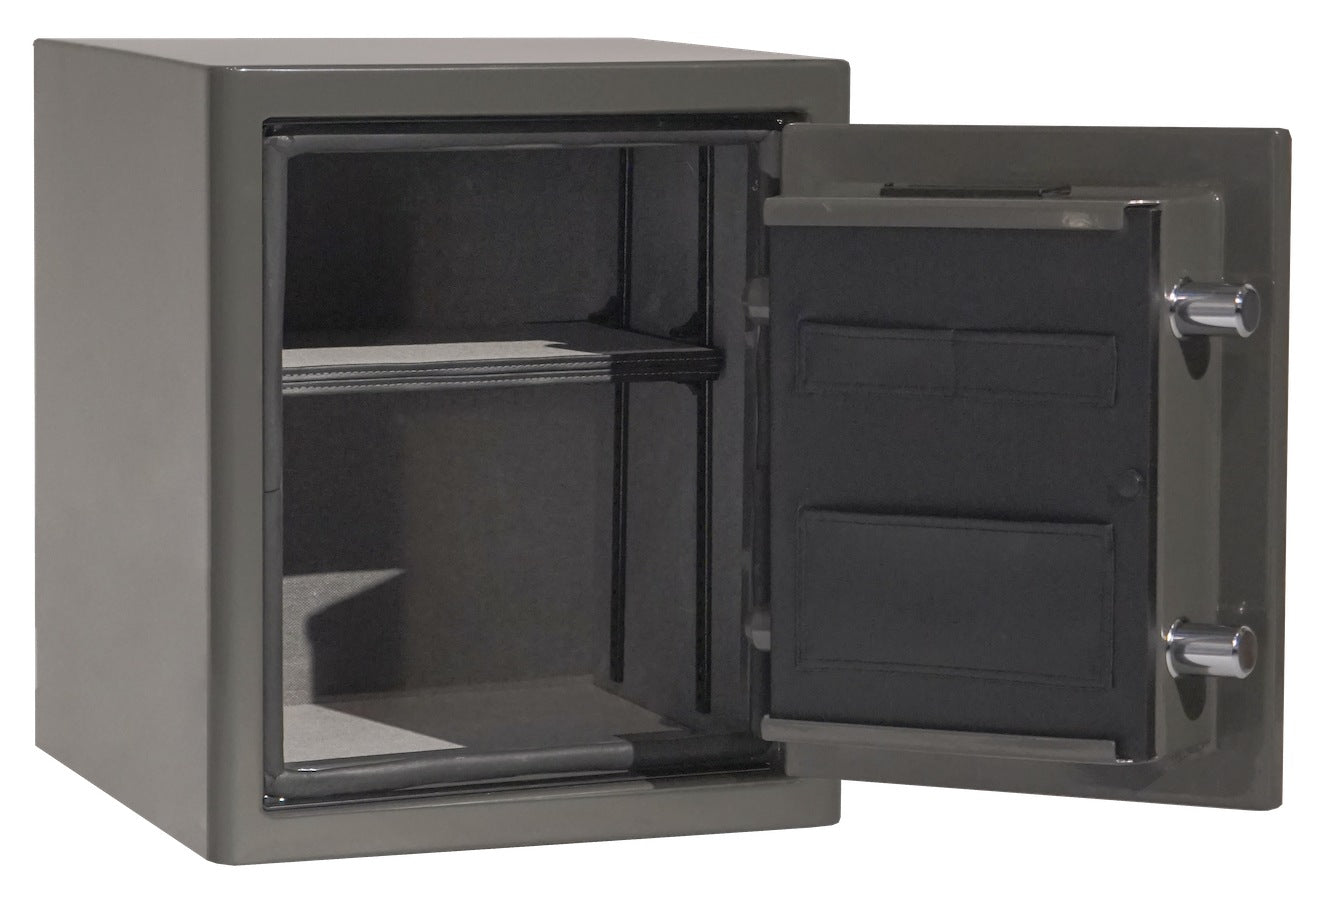 Fireproof Safes & Waterproof Chests - Sports Afield SA-H3 Sanctuary Platinum Series Home & Office Safe